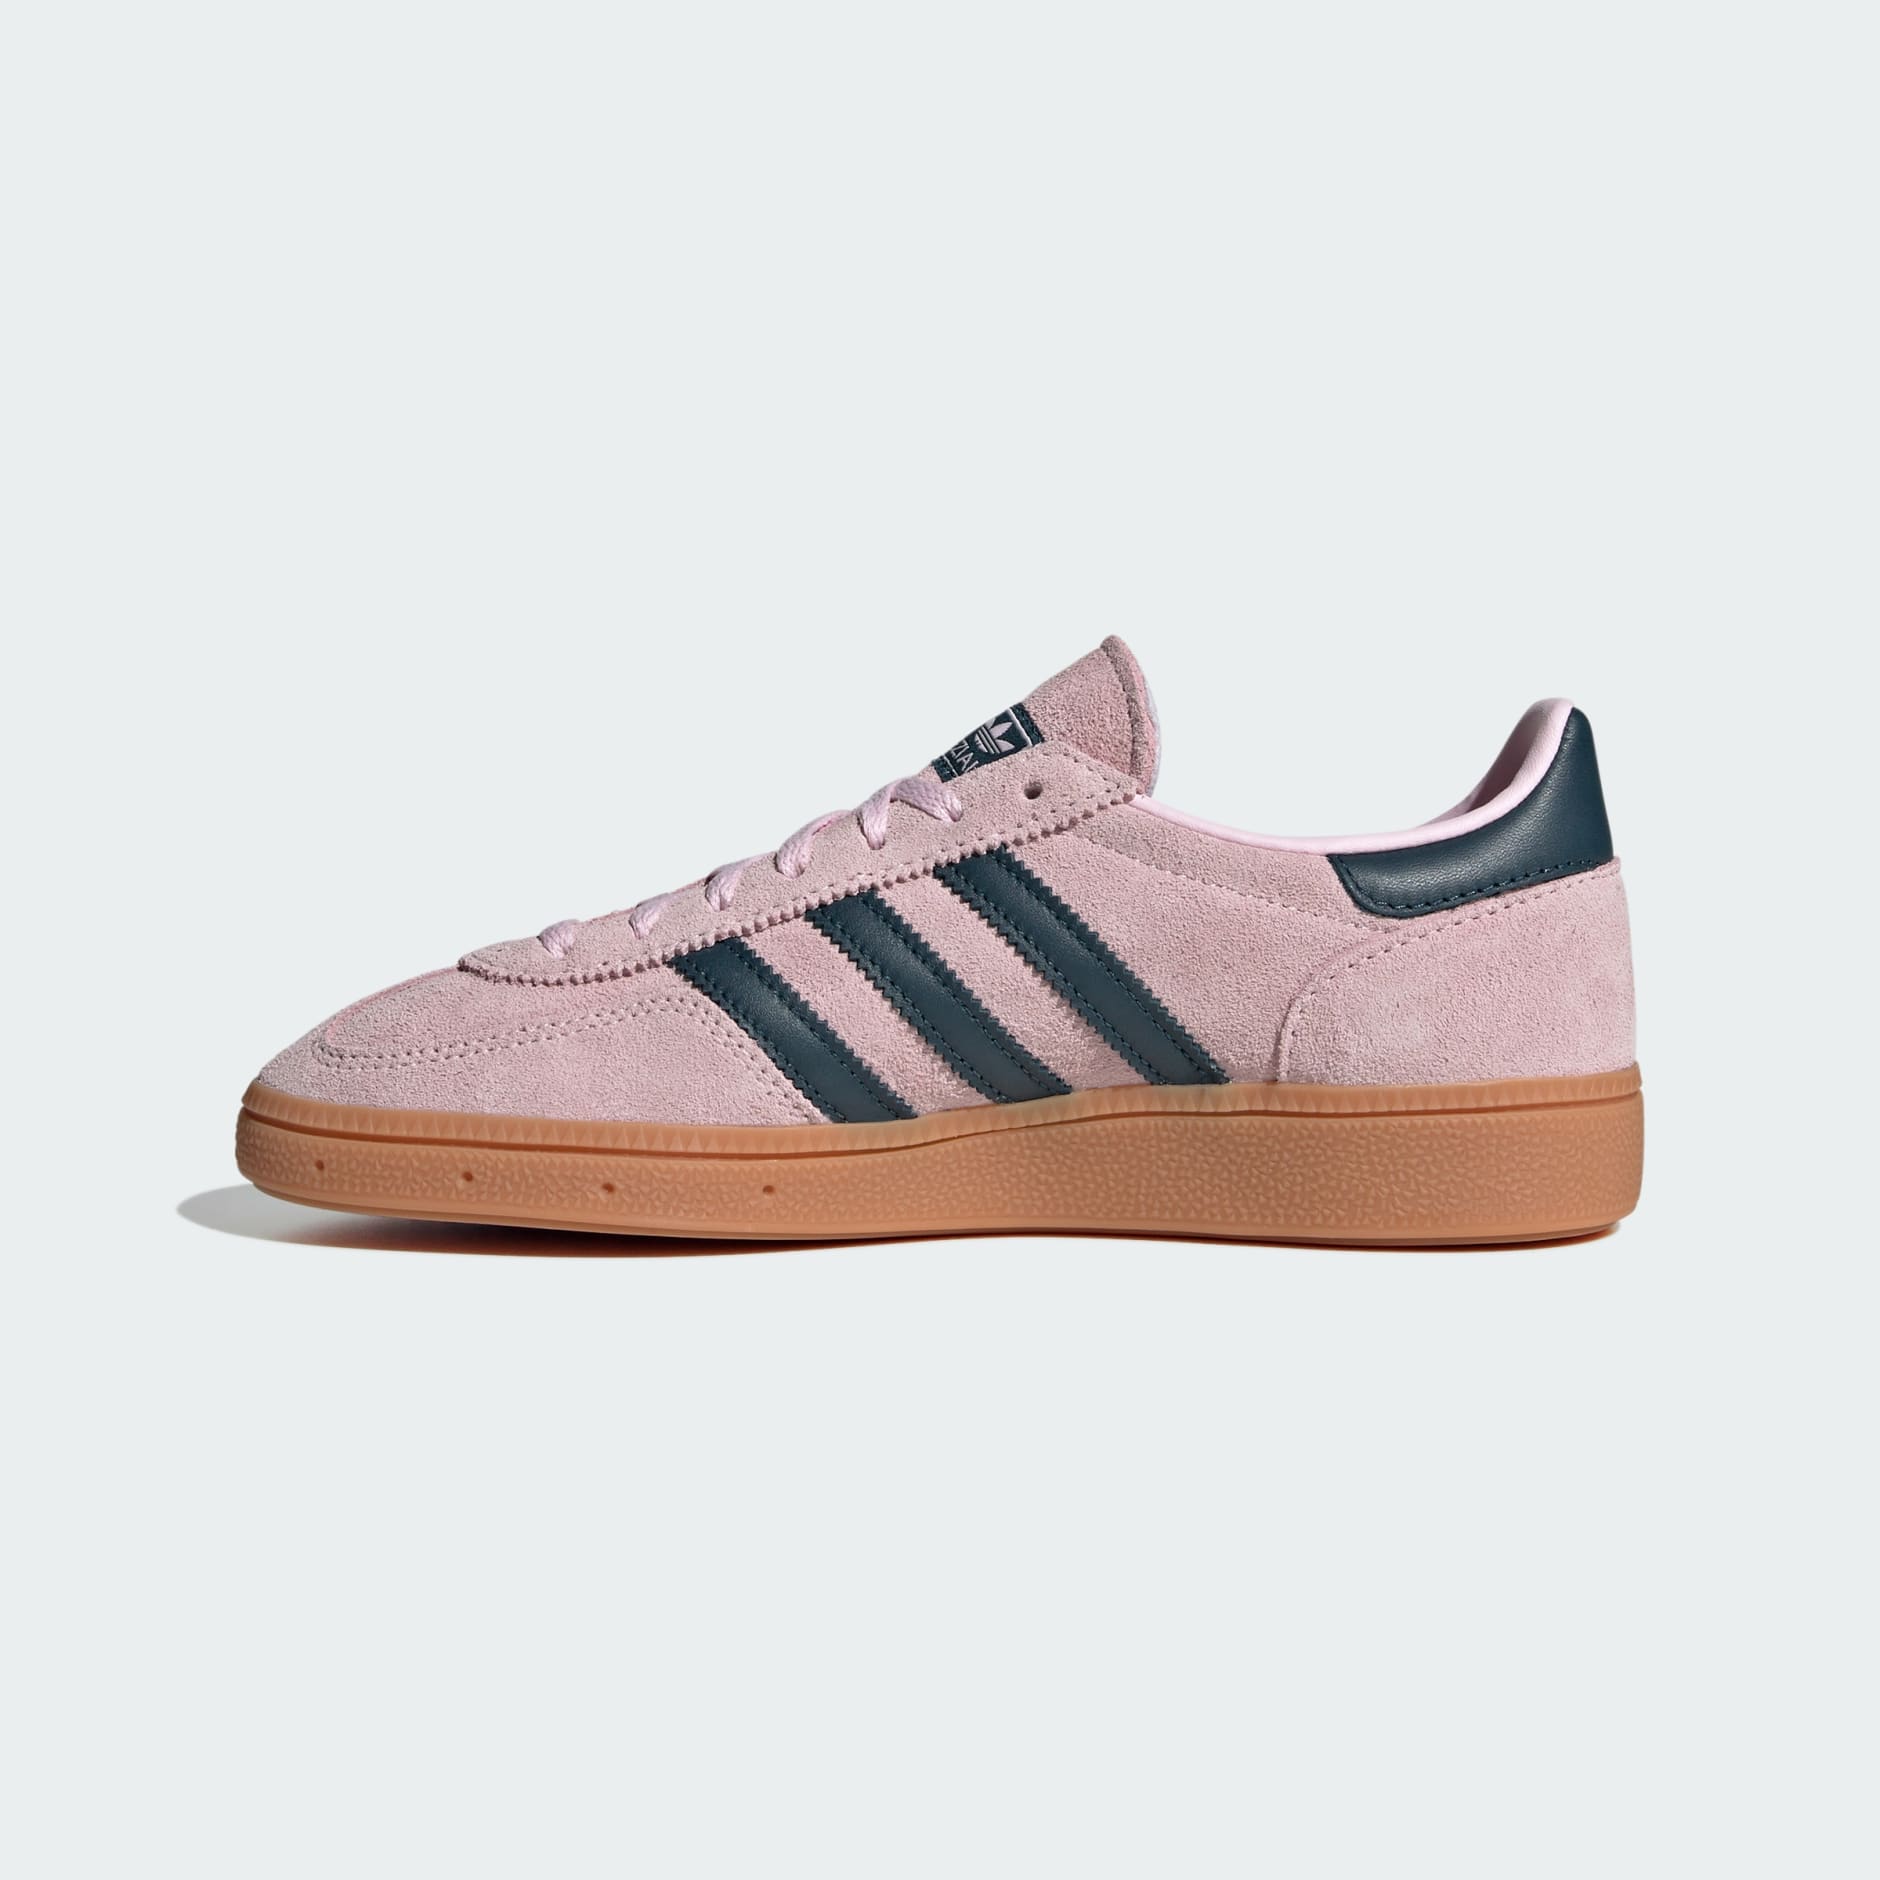 Shoes - Handball Spezial Shoes - Pink | adidas South Africa